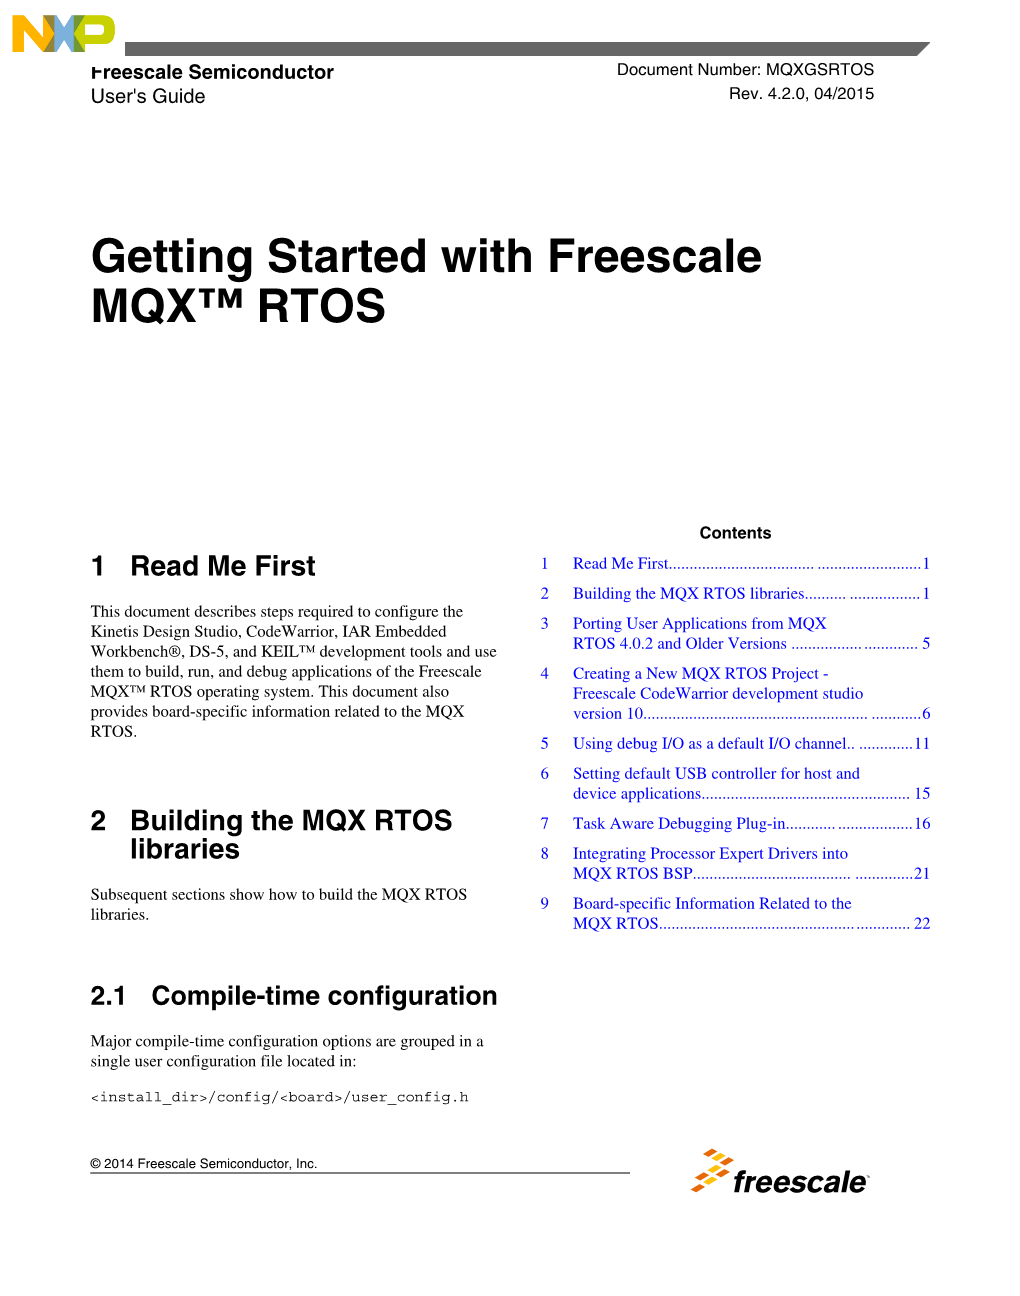 Getting Started with Freescale MQX RTOS